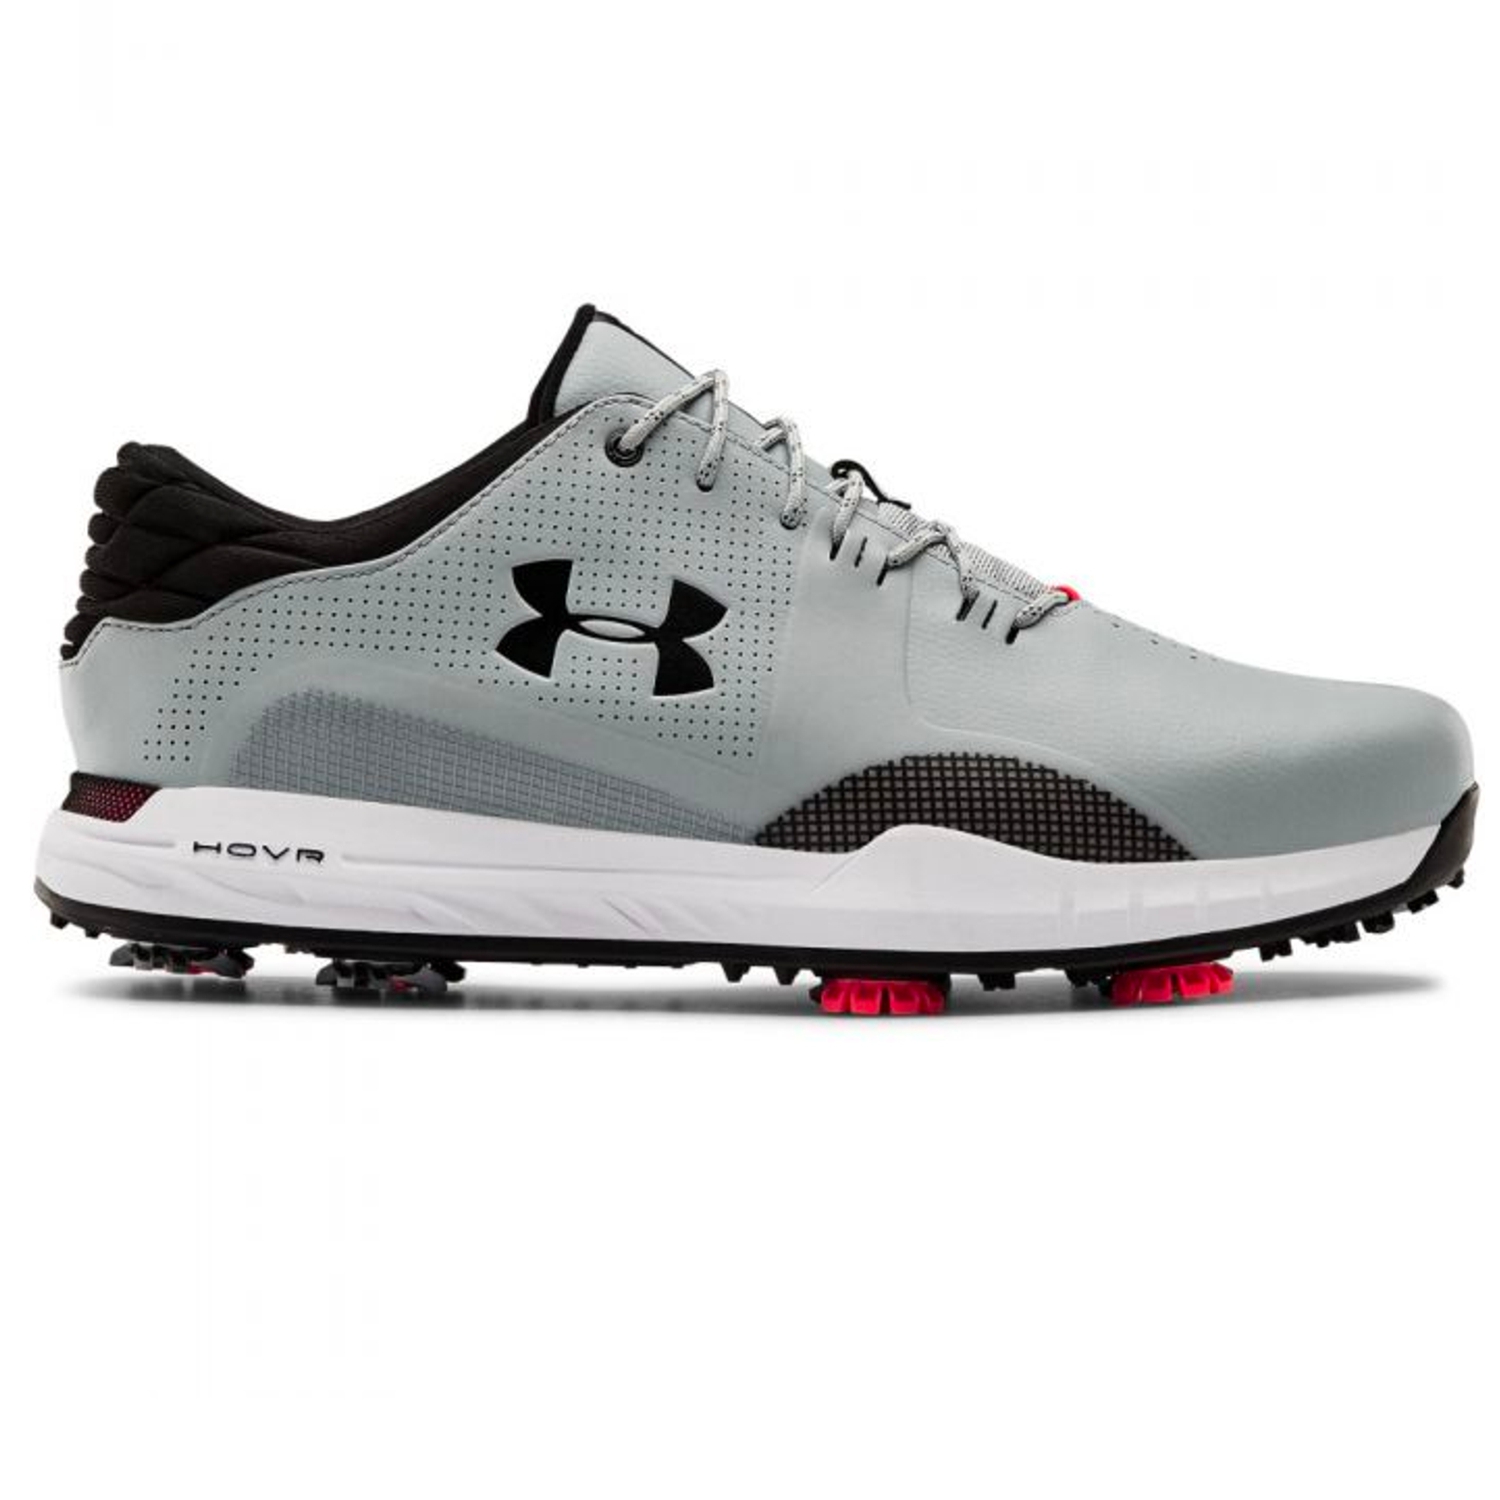 Under Armour HOVR Matchplay Golf Shoes 